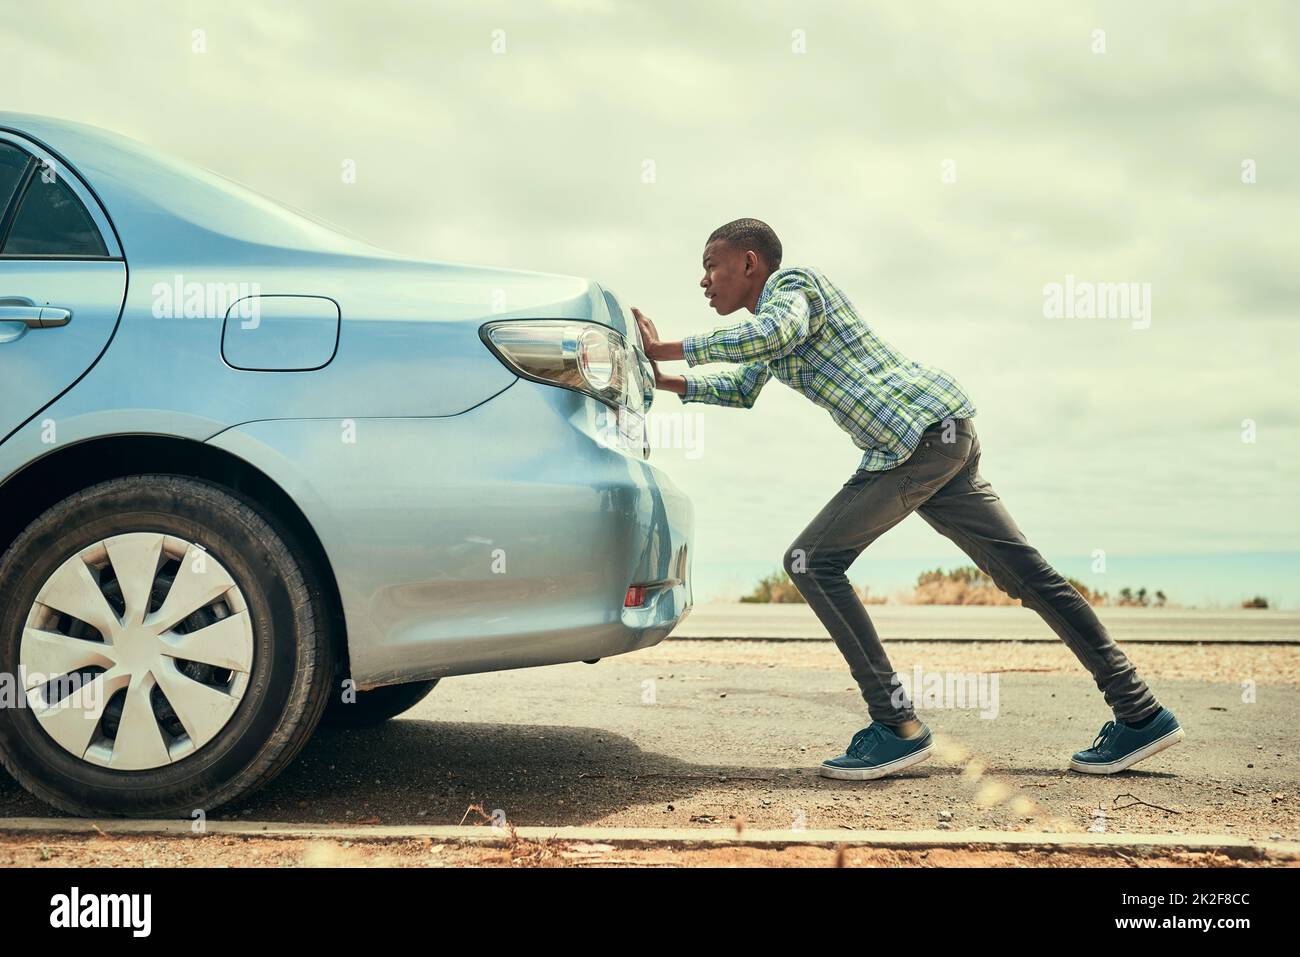 Sometimes youve gotta get out and push. Full length shot of a young man pushing his car along the road after breaking down. Stock Photo